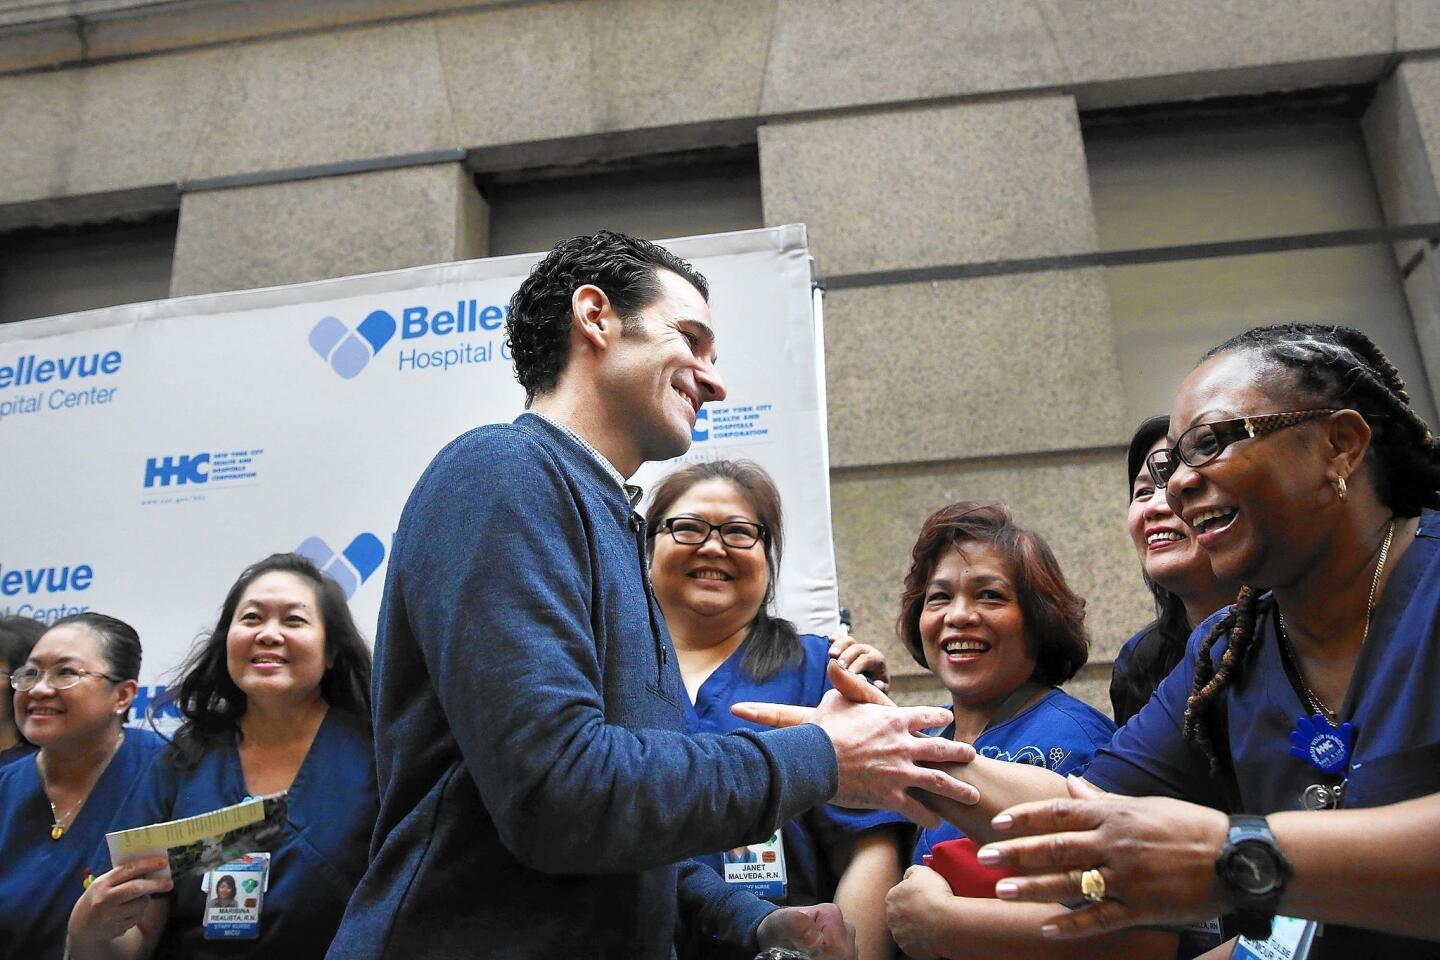 After being released from the hospital in New York City on Nov. 11, Dr. Craig Spencer, now virus-free, greets some of the Bellevue staff members who treated him after he was diagnosed with Ebola.